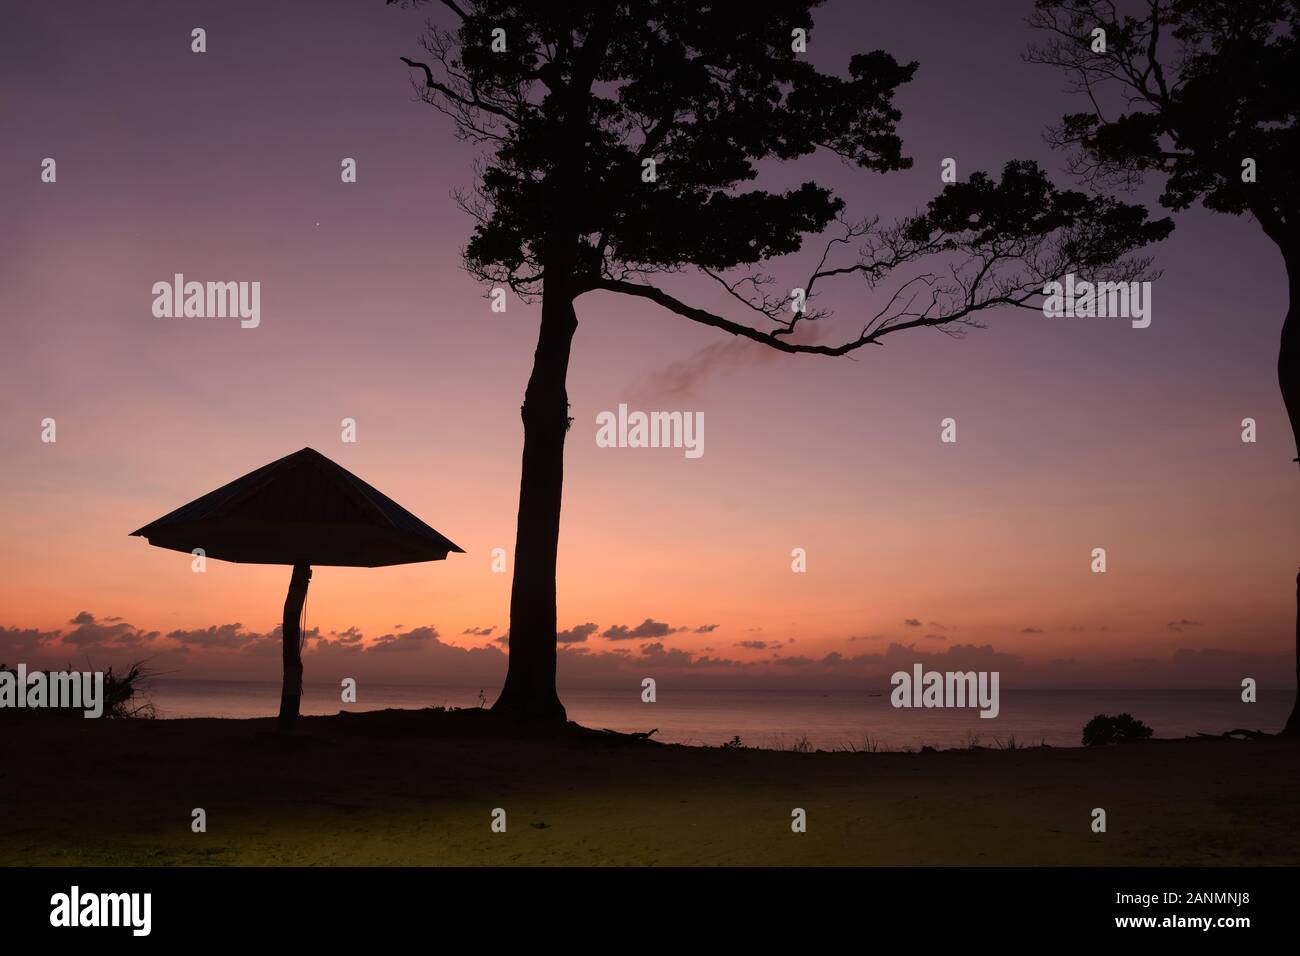 Silhouette of Beach umbrella and trees at the beach during sunset time. Stock Photo